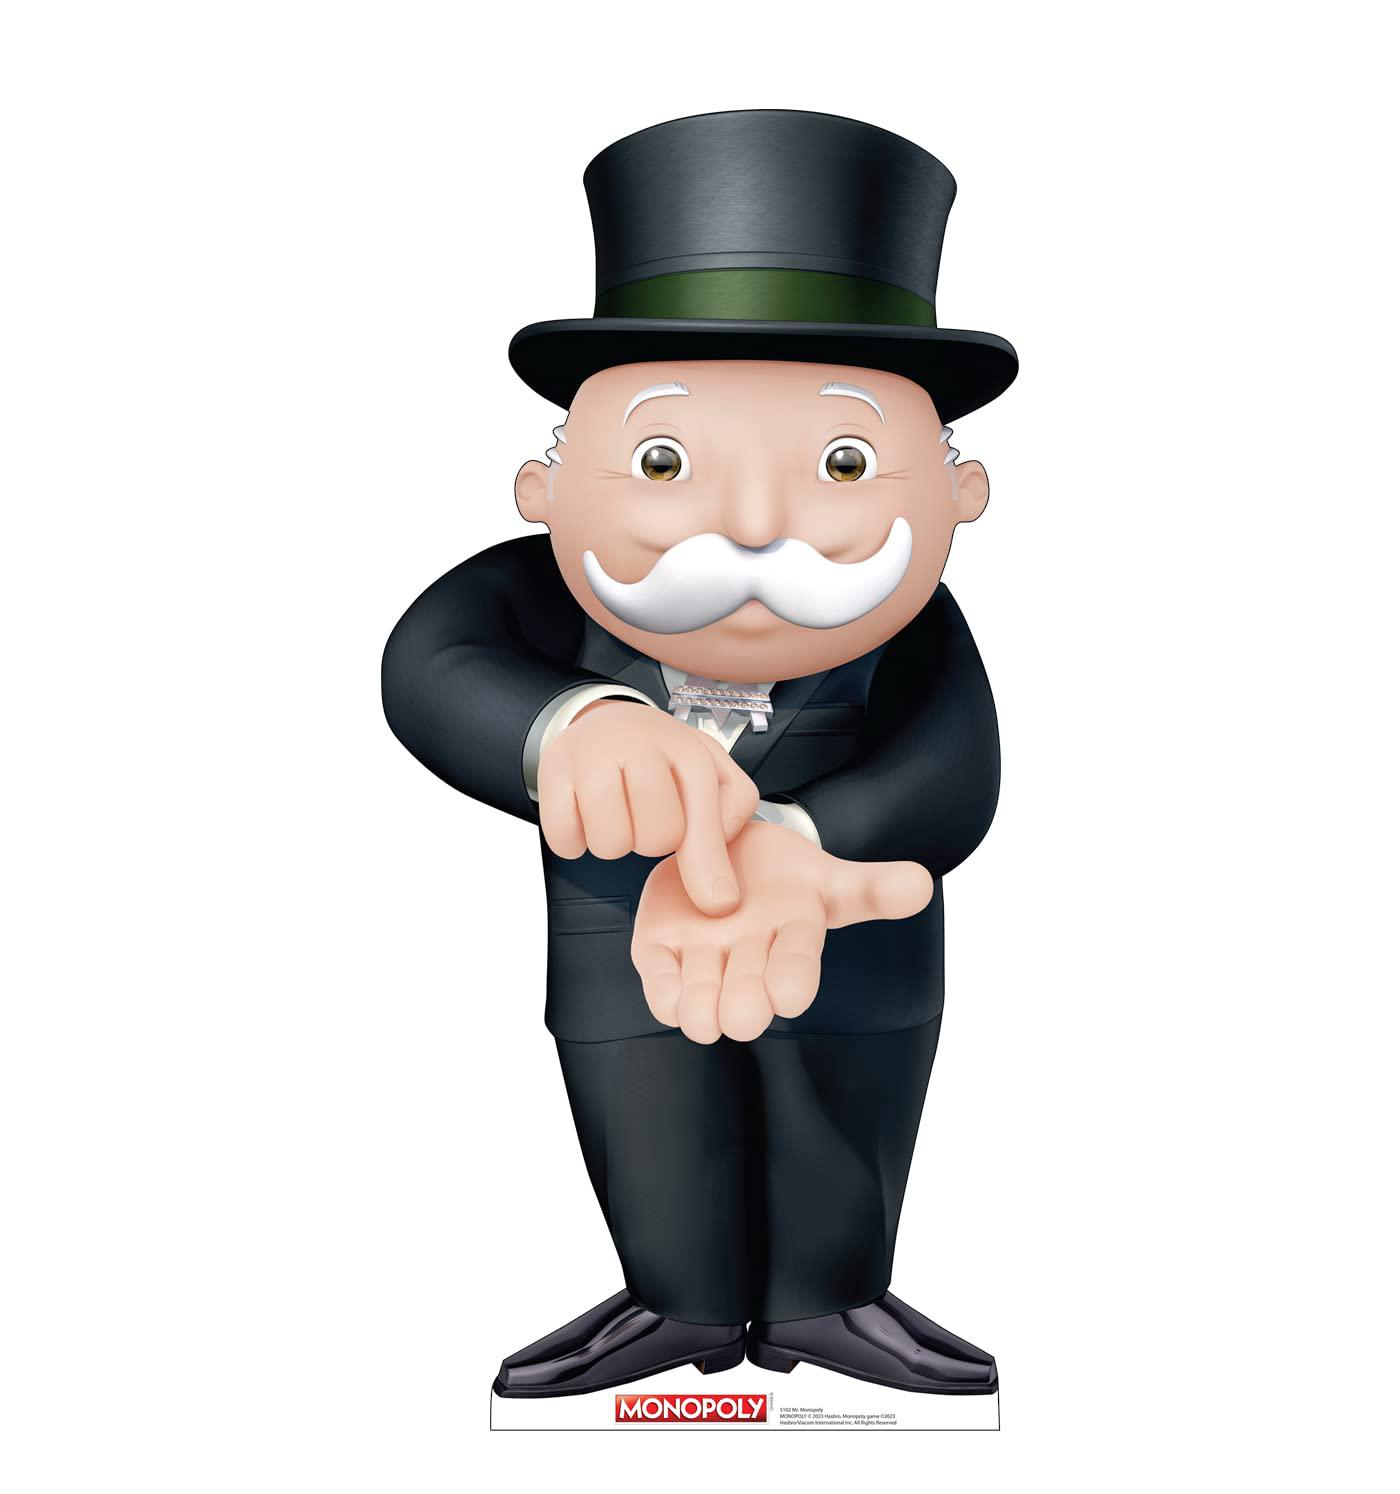 Cardboard People Advanced Graphics 5102 48 x 23 in. Mr. Monopoly Life-Size Cardboard Cutout